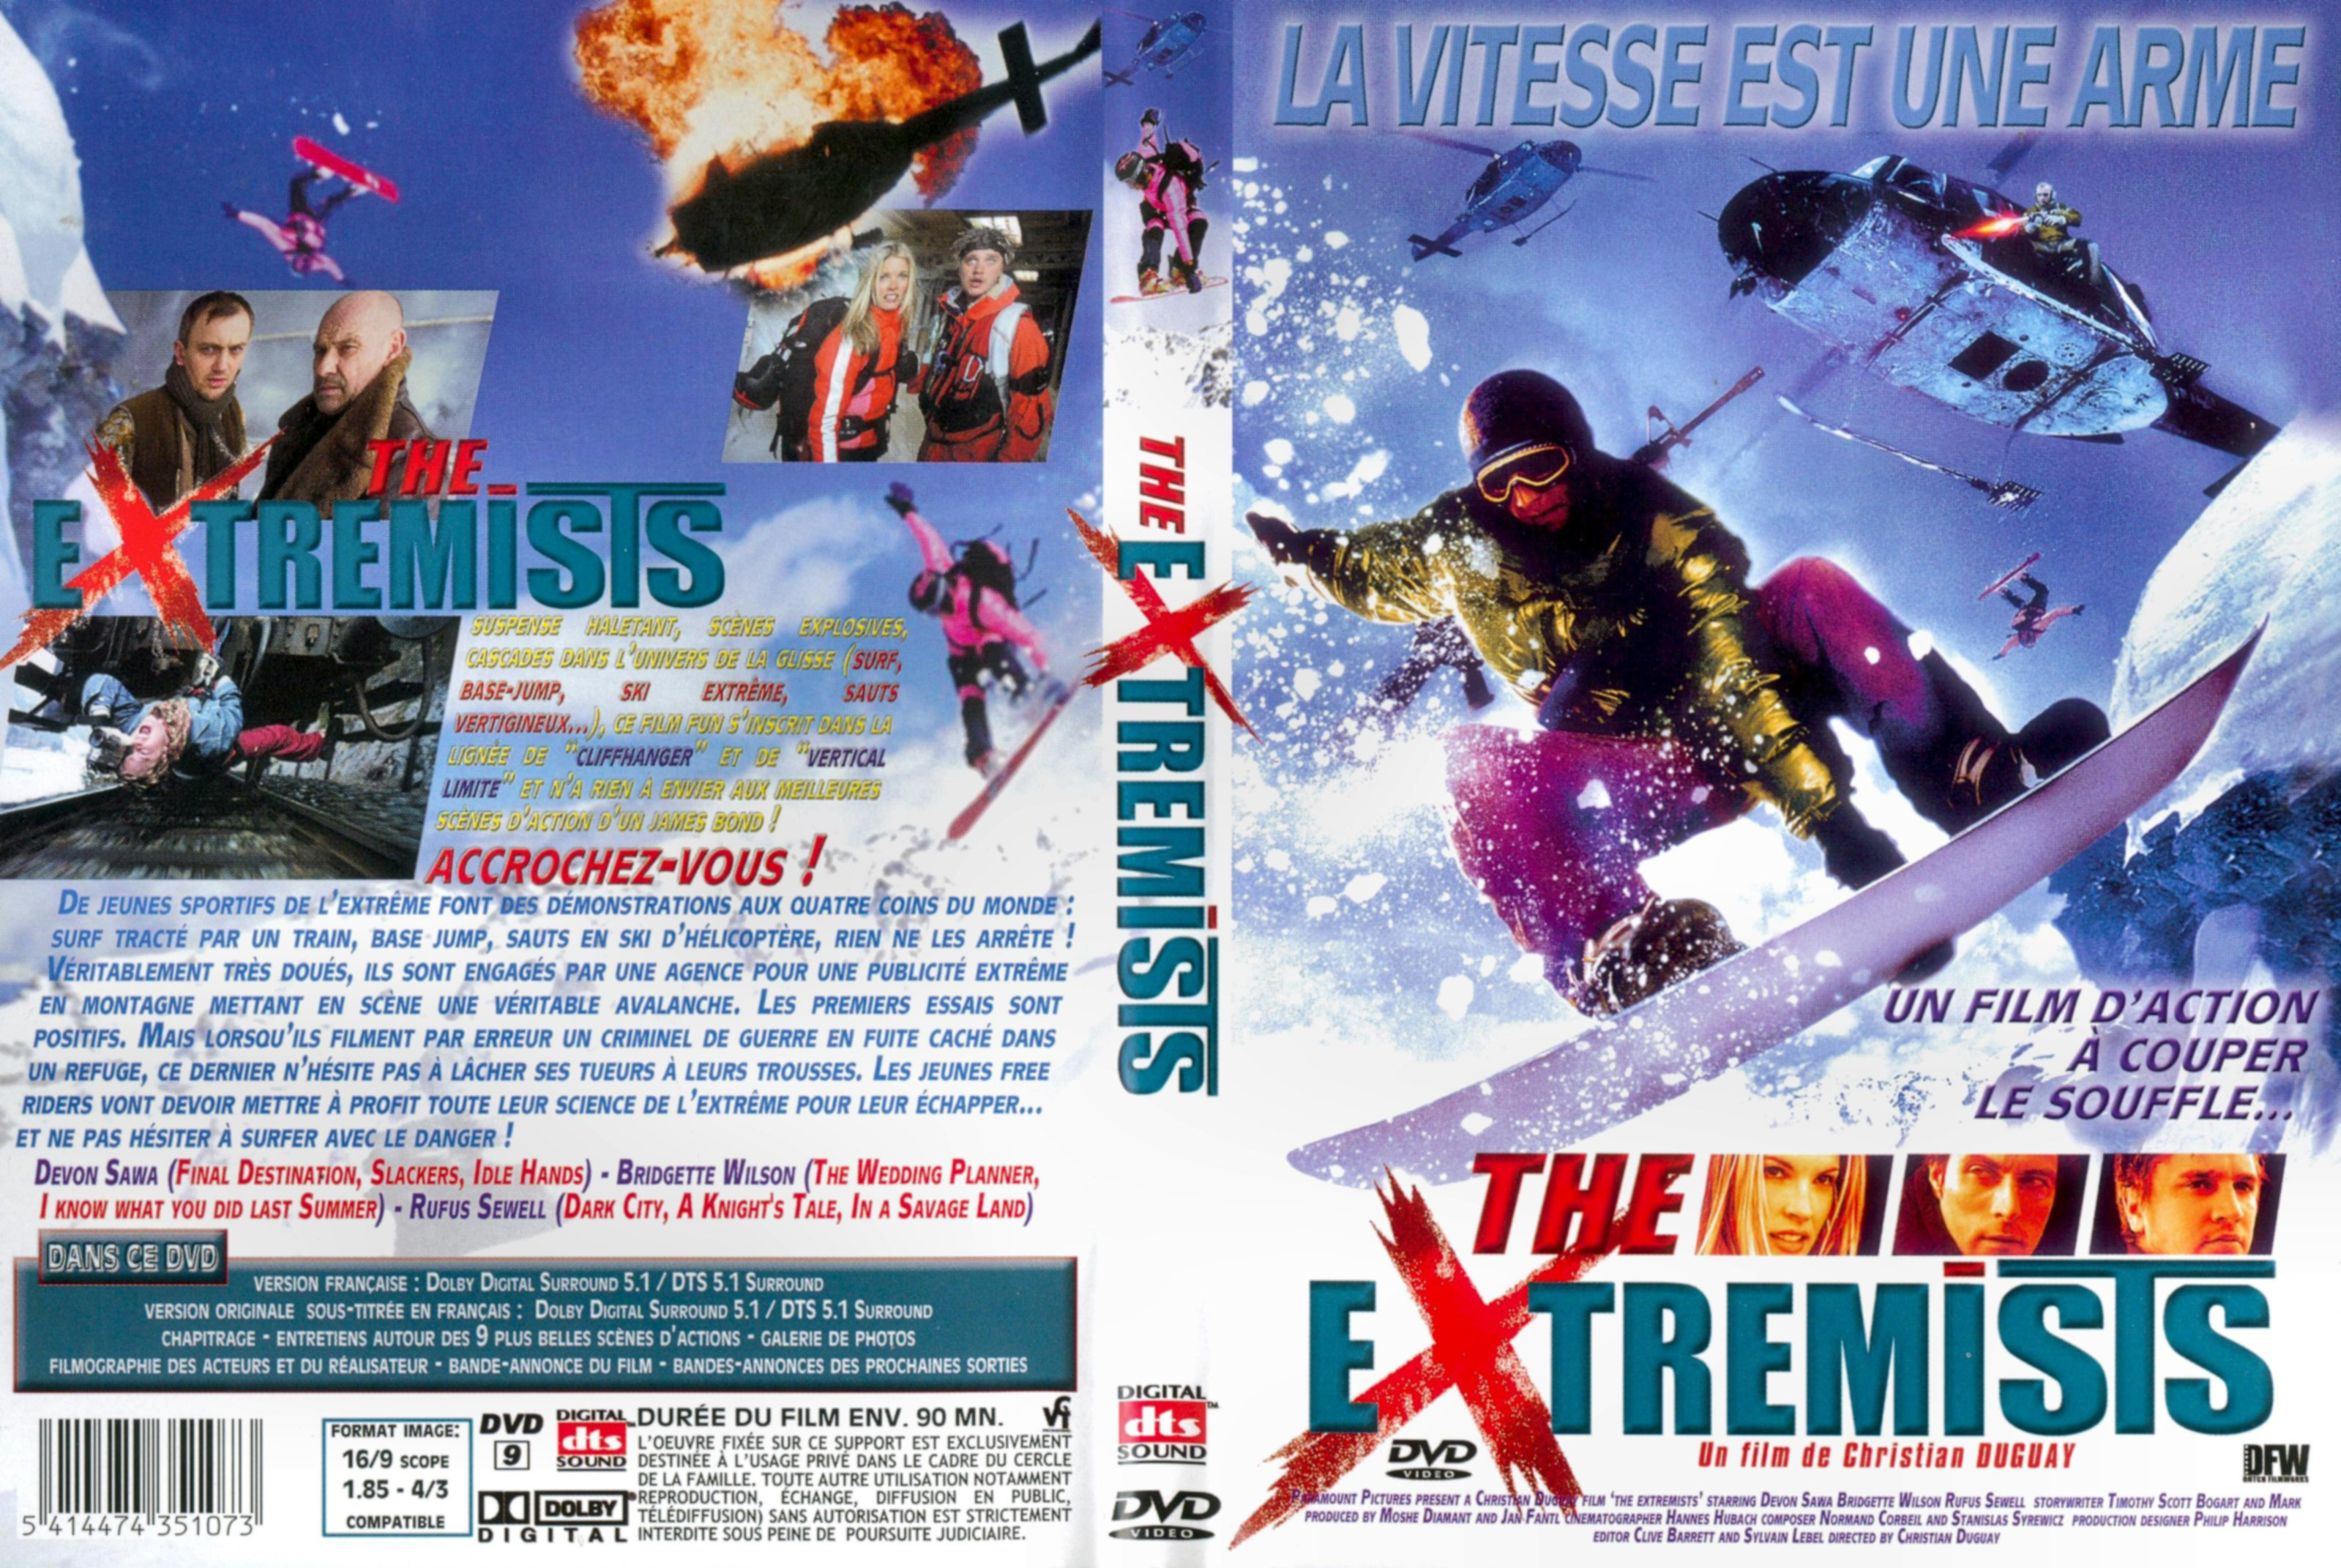 Jaquette DVD The extremists v2